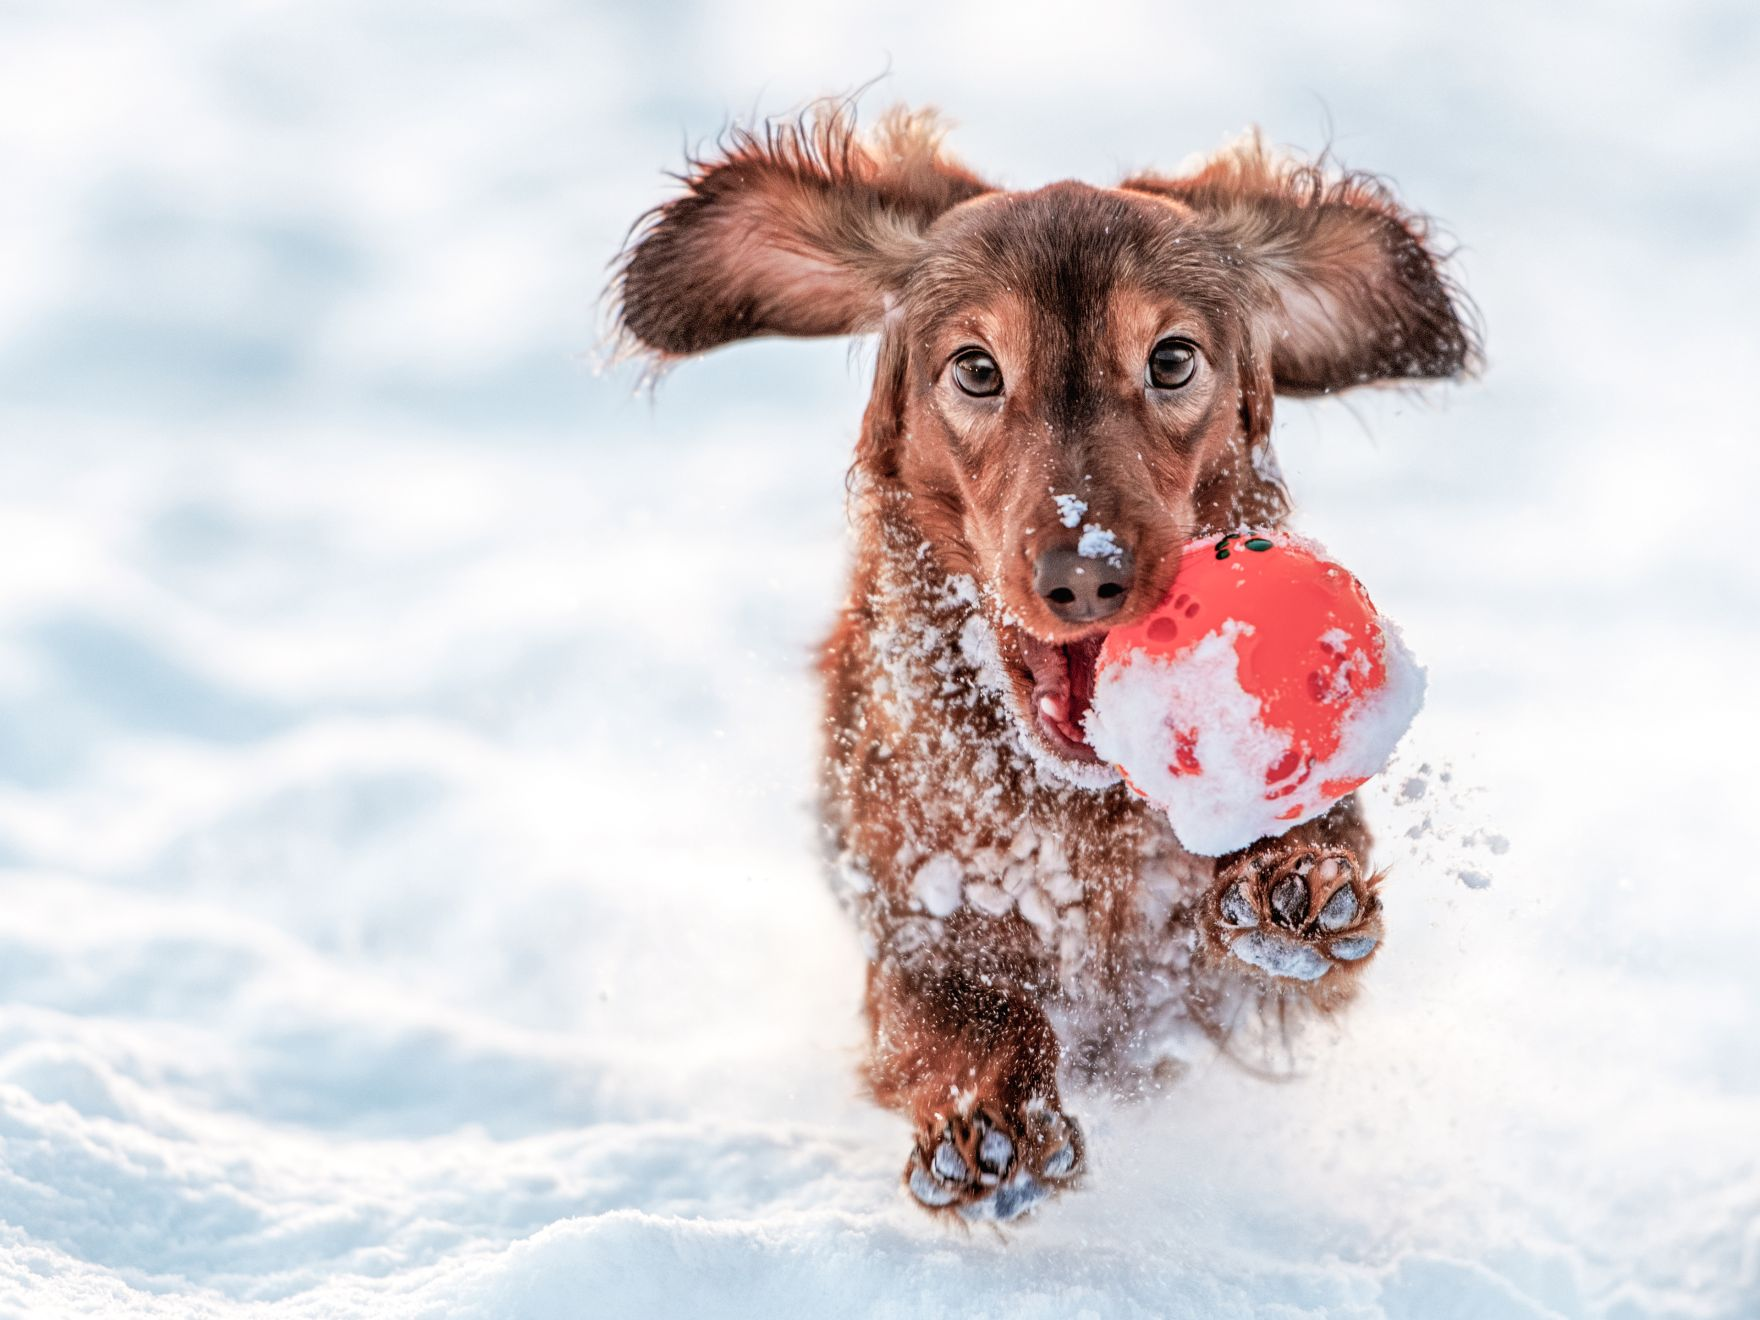 Dachshund puppy running outside in the snow with a red ball